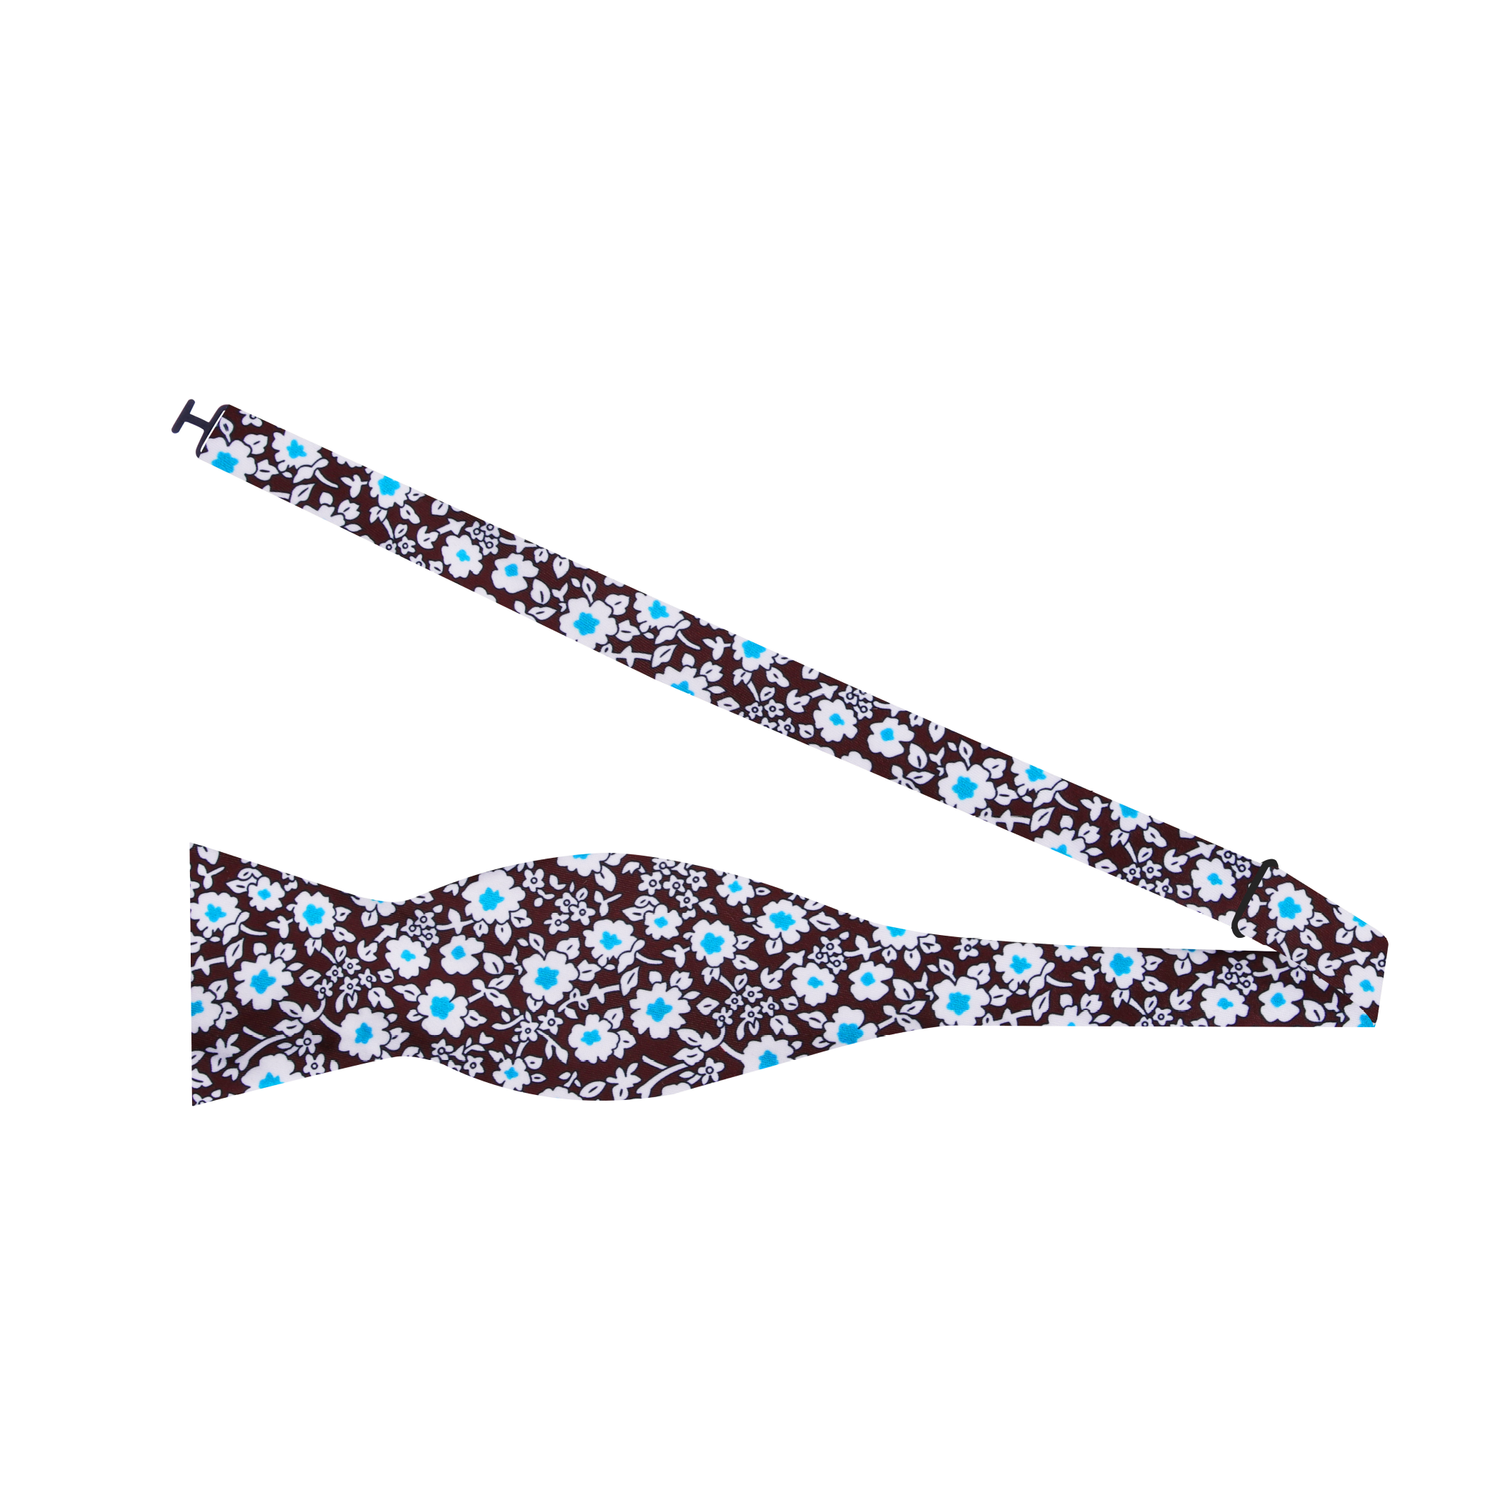 Brown, Light Blue, White Small Flowers Bow Tie Self Tie